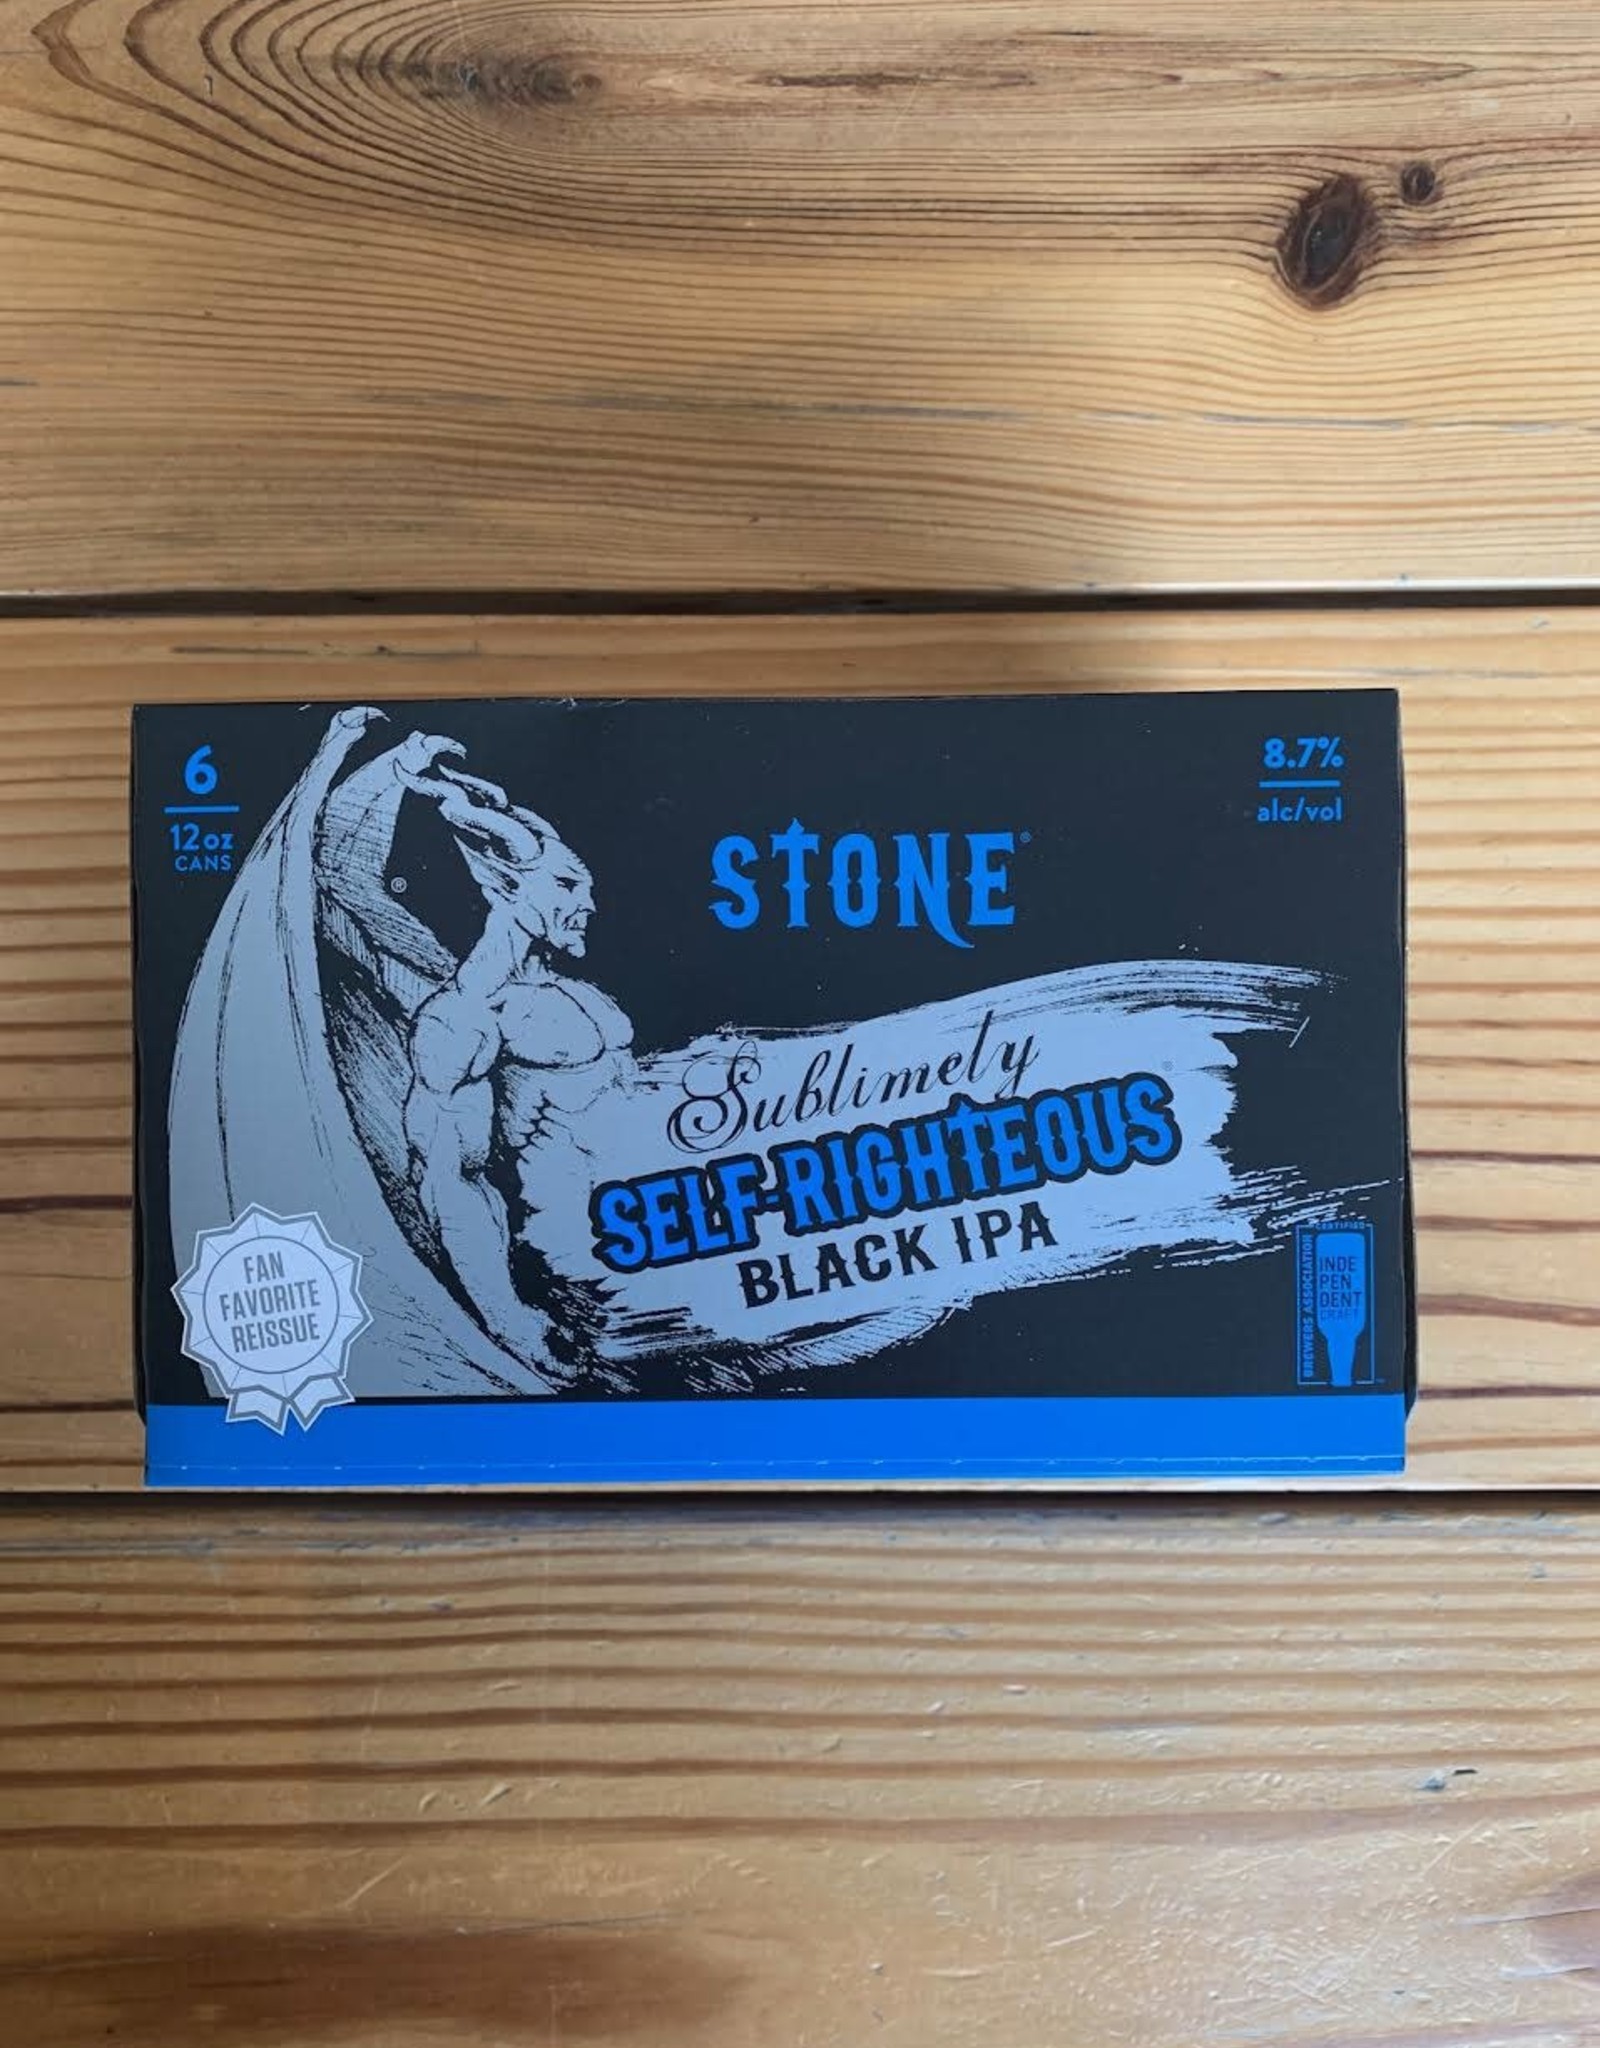 Stone 6 PACK Stone Sublimly Self-Righteous Imperial Black IPA